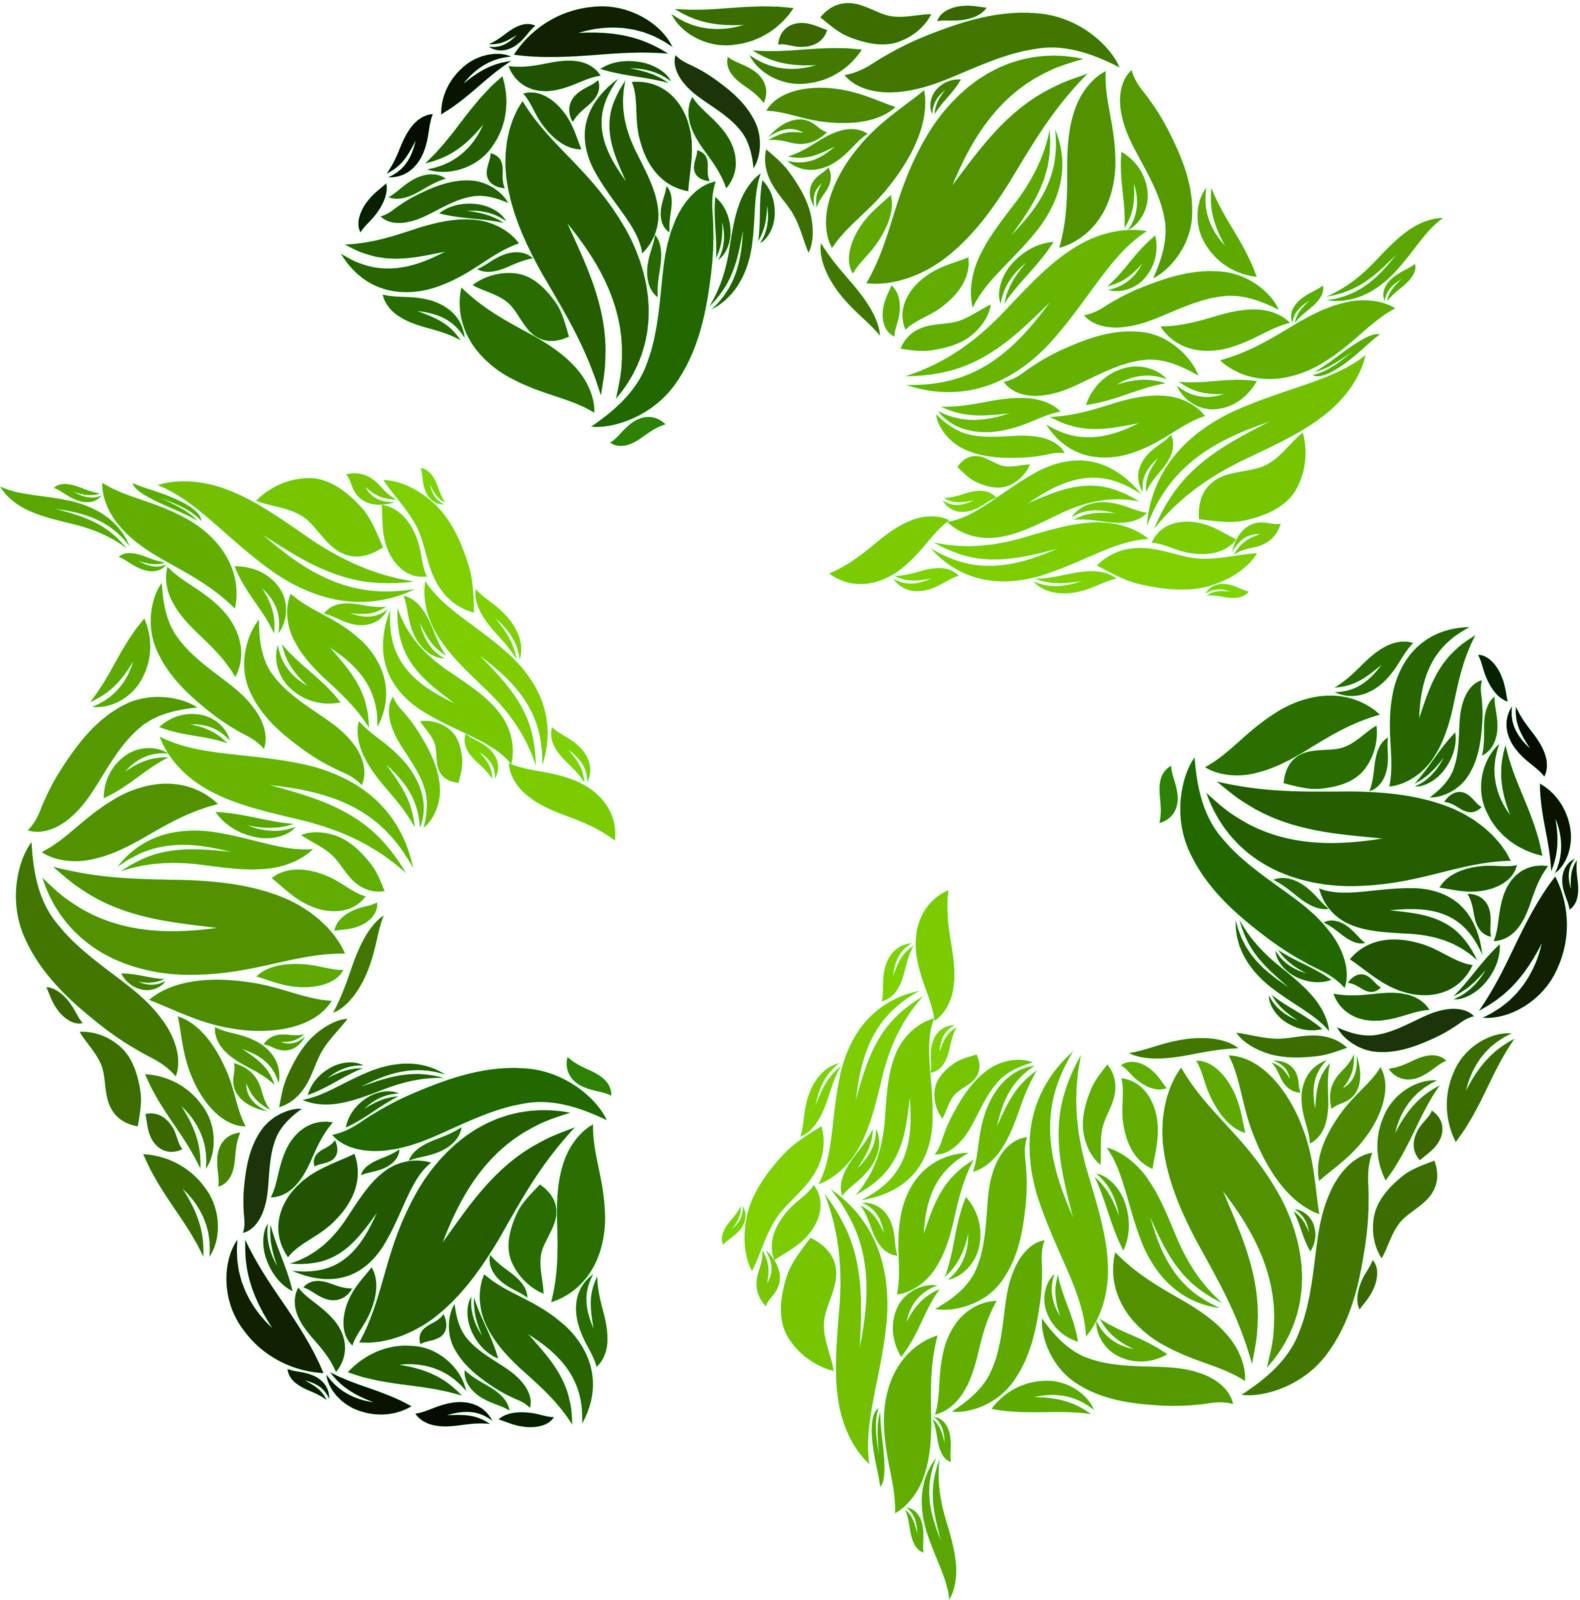 Recyclin symbol made from leaves. Vector illustration.